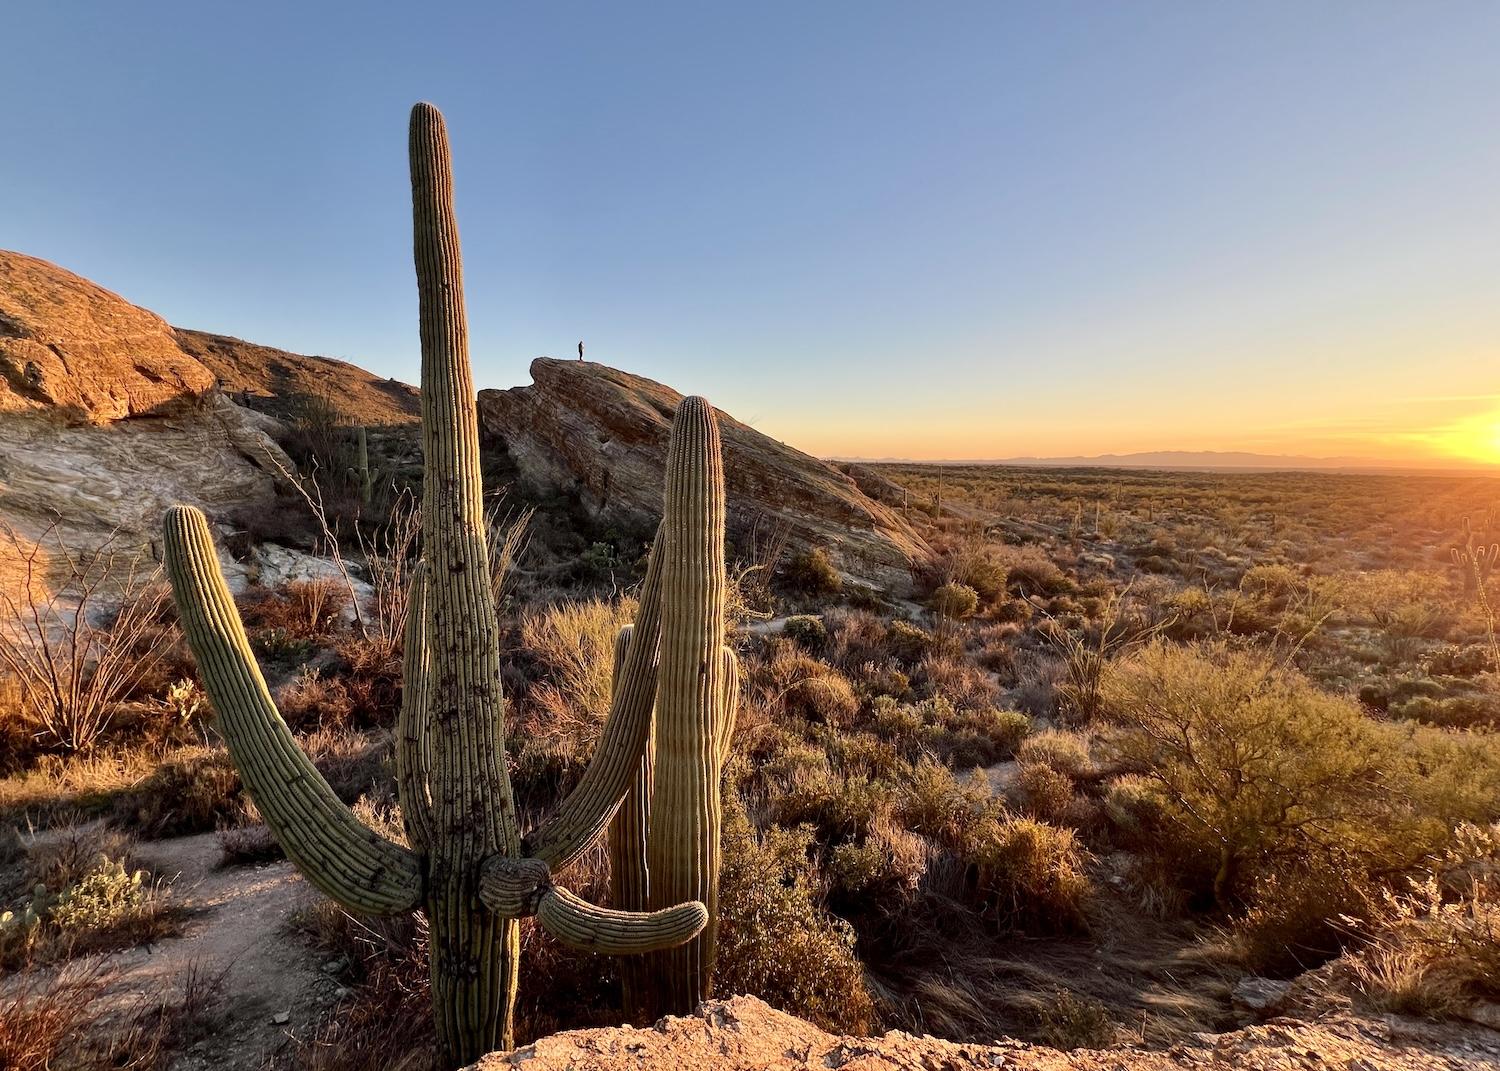 A man stands on the Javelina Rocks at sunset in Saguaro National Park.